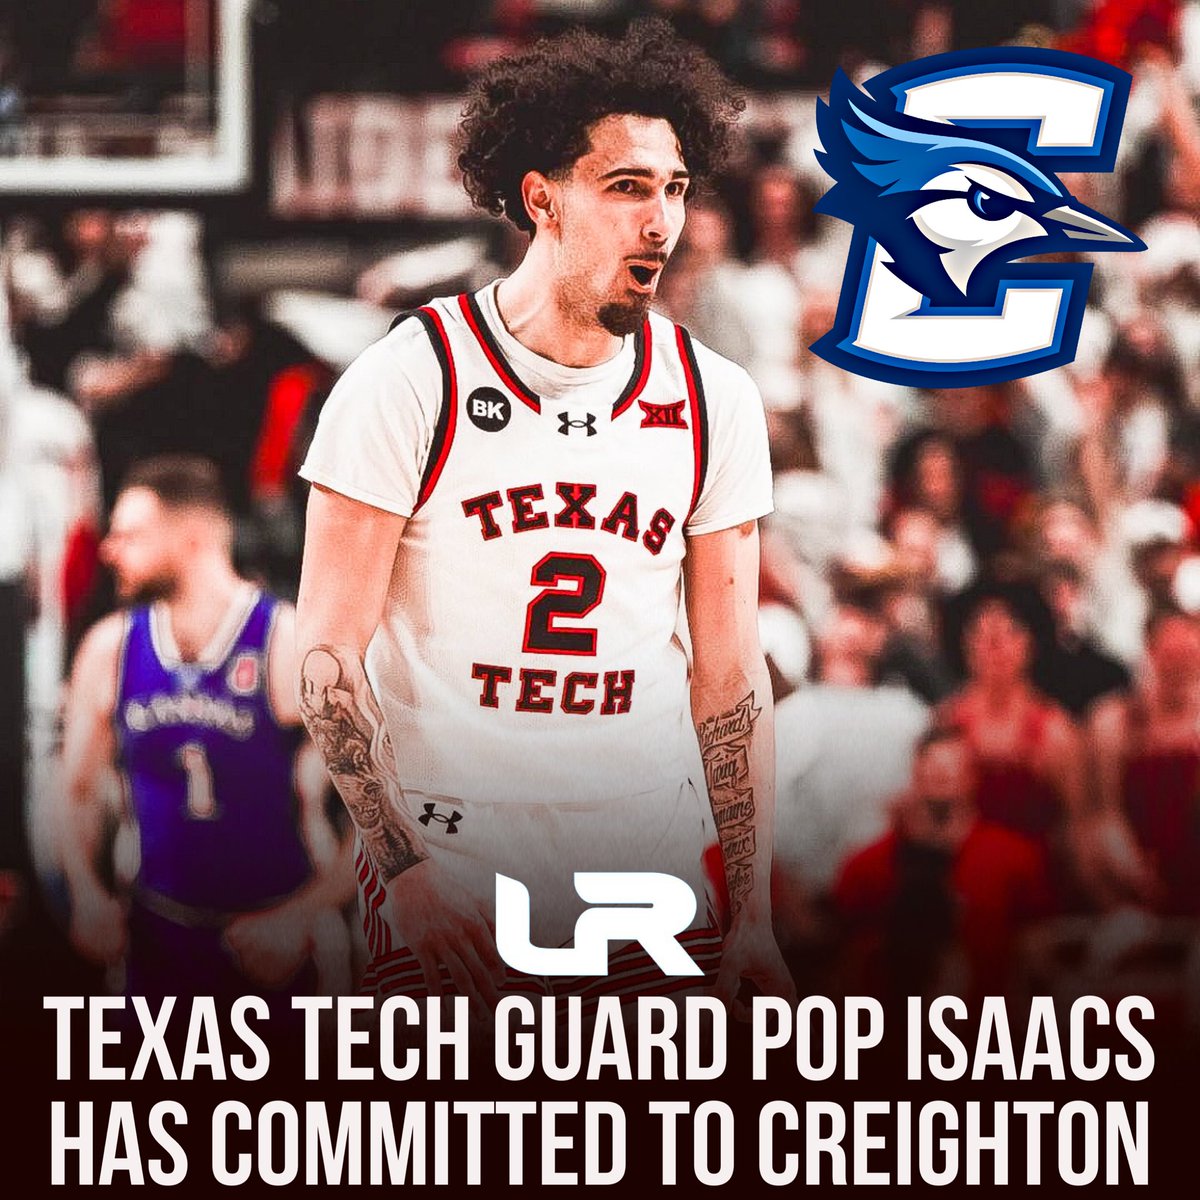 NEWS: Texas Tech transfer Pop Isaacs has committed to Creighton, a source tells @LeagueRDY. Isaacs spent the last two seasons at Texas Tech and has been one of the top players in the Big 12. Native of Las Vegas, Nevada. He averaged 15.8PPG, 3.5APG and 3.2RPG this season.